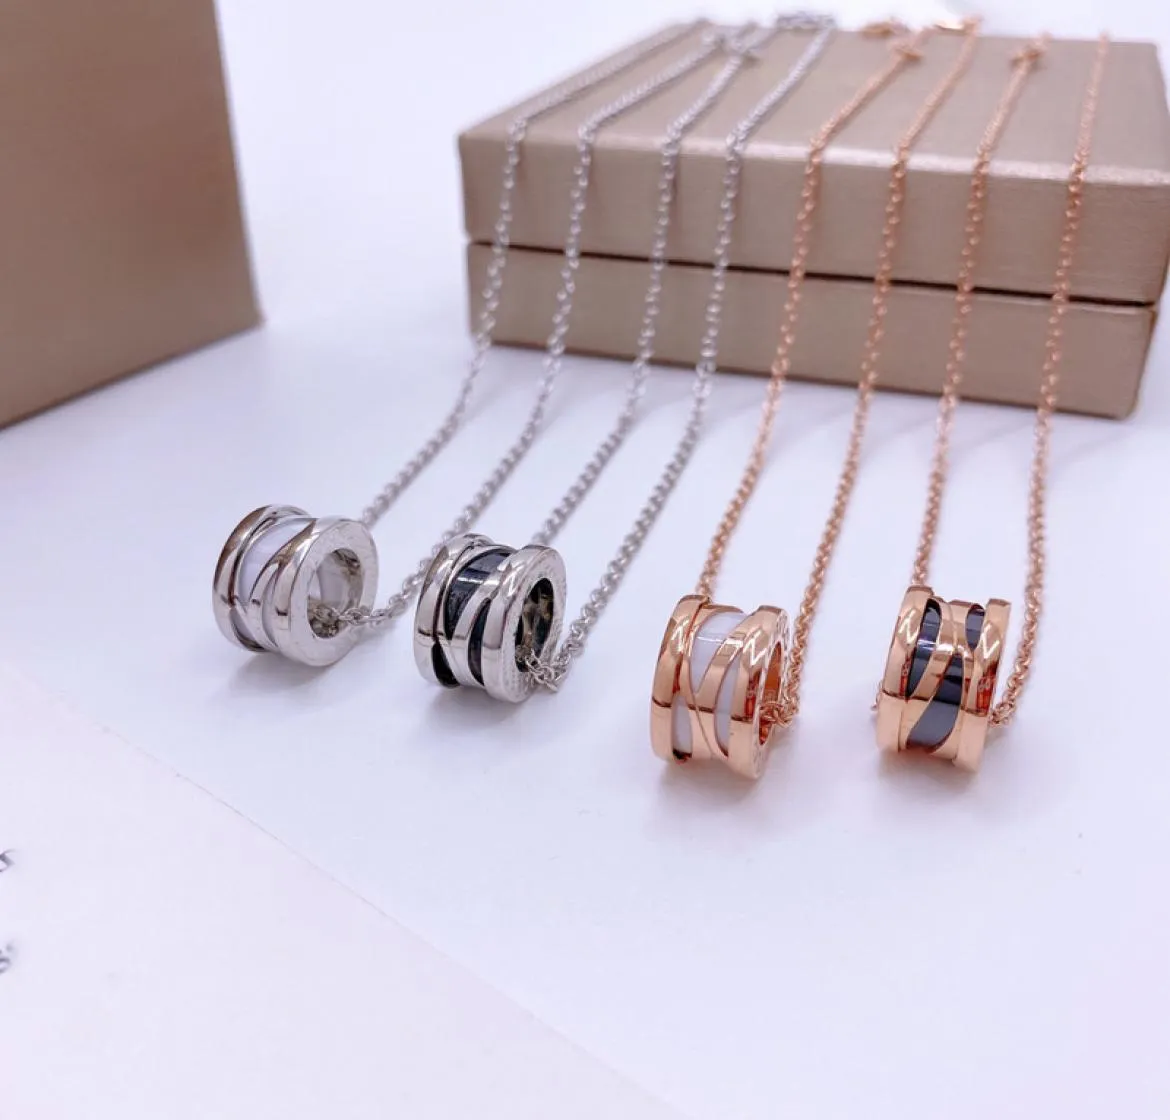 Designer Jewelry Necklaces Rose Gold Silver Stainless Steel Luxury Simple Pattern Buckle Love necklaceWomen Mens Bracelets Brand Cart1108310